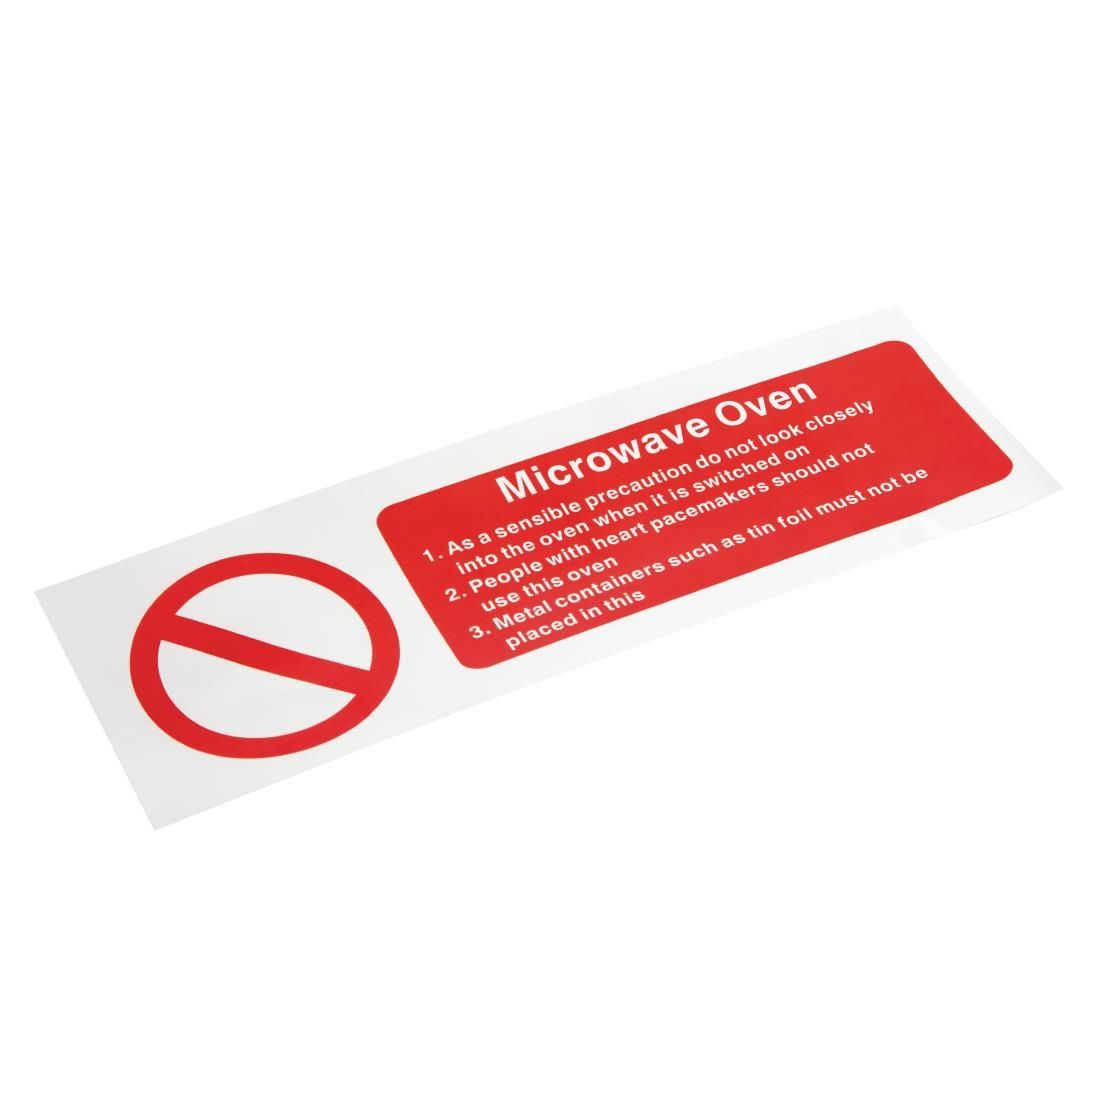 W231 Vogue Microwave Oven Safety Sign